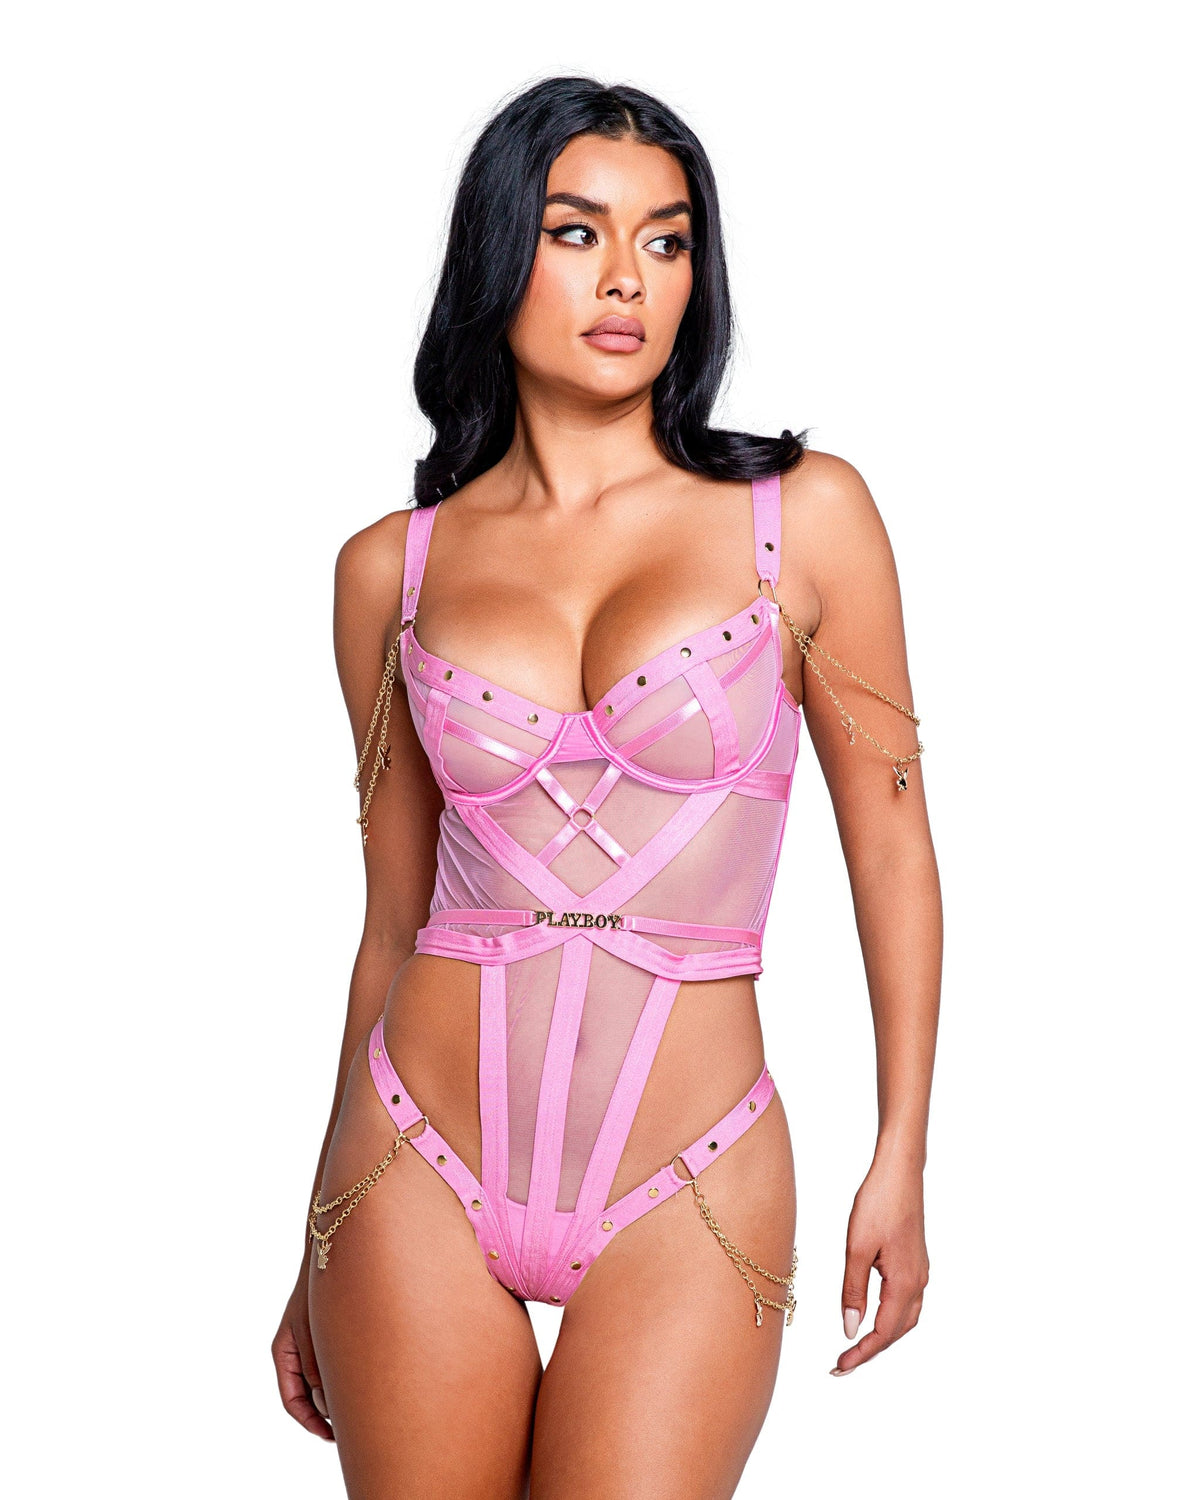 Roma Pink / Small Pink Sheer Mesh Playboy Thong Teddy w/ Logo Chains PBLI124-Pink/Gold-S 2023 Sexy 2 Pc Black Rebel Heart Satin Short Set Lingerie Apparel &amp; Accessories &gt; Clothing &gt; Underwear &amp; Socks &gt; Lingerie